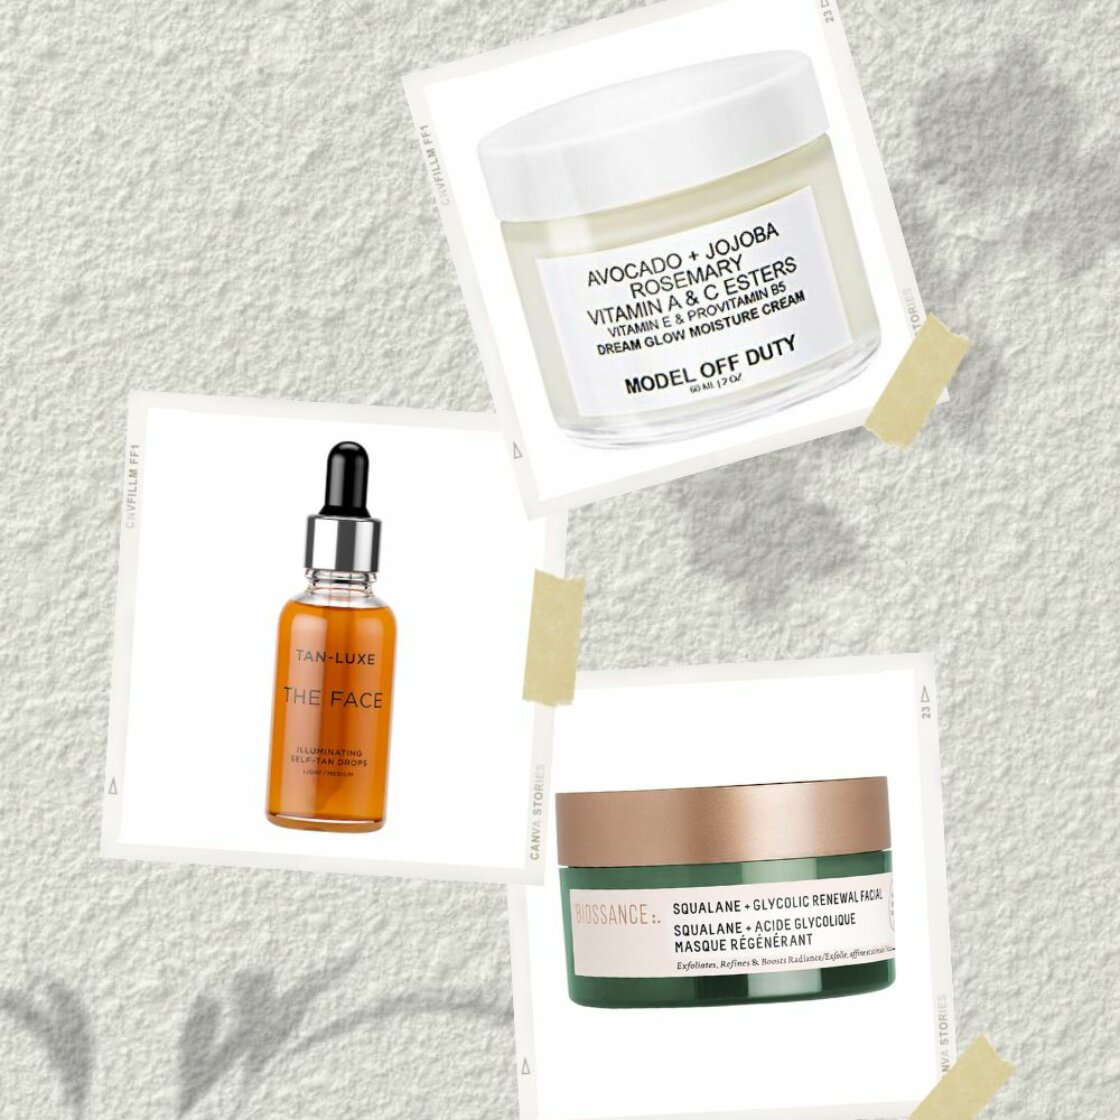 Say Goodbye To All Your Skincare Issues With These 7 Incredible Products